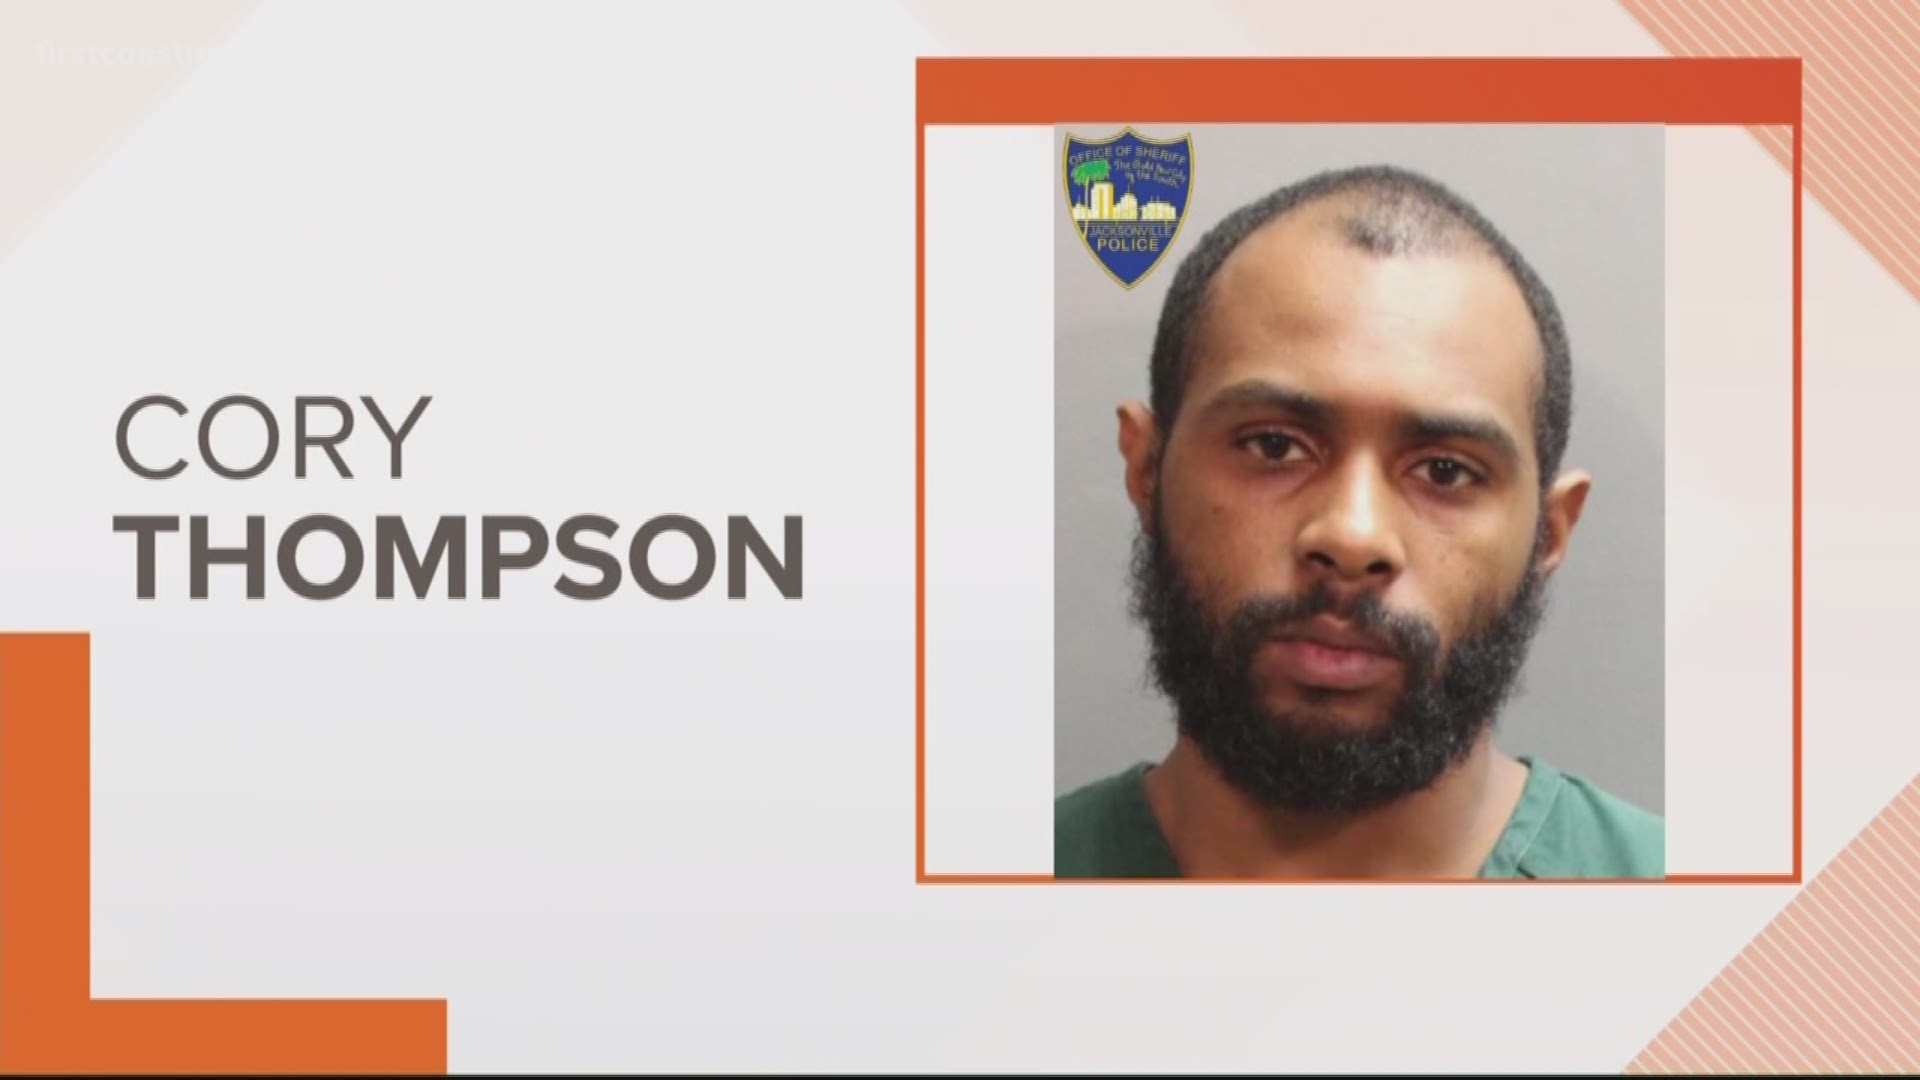 The Jacksonville Sheriff's Office has stated that Thompson knew the woman and was in an on-again-off-again relationship with her for the past two years. He has been charged with attempted murder and possession of a firearm by a convicted felon.